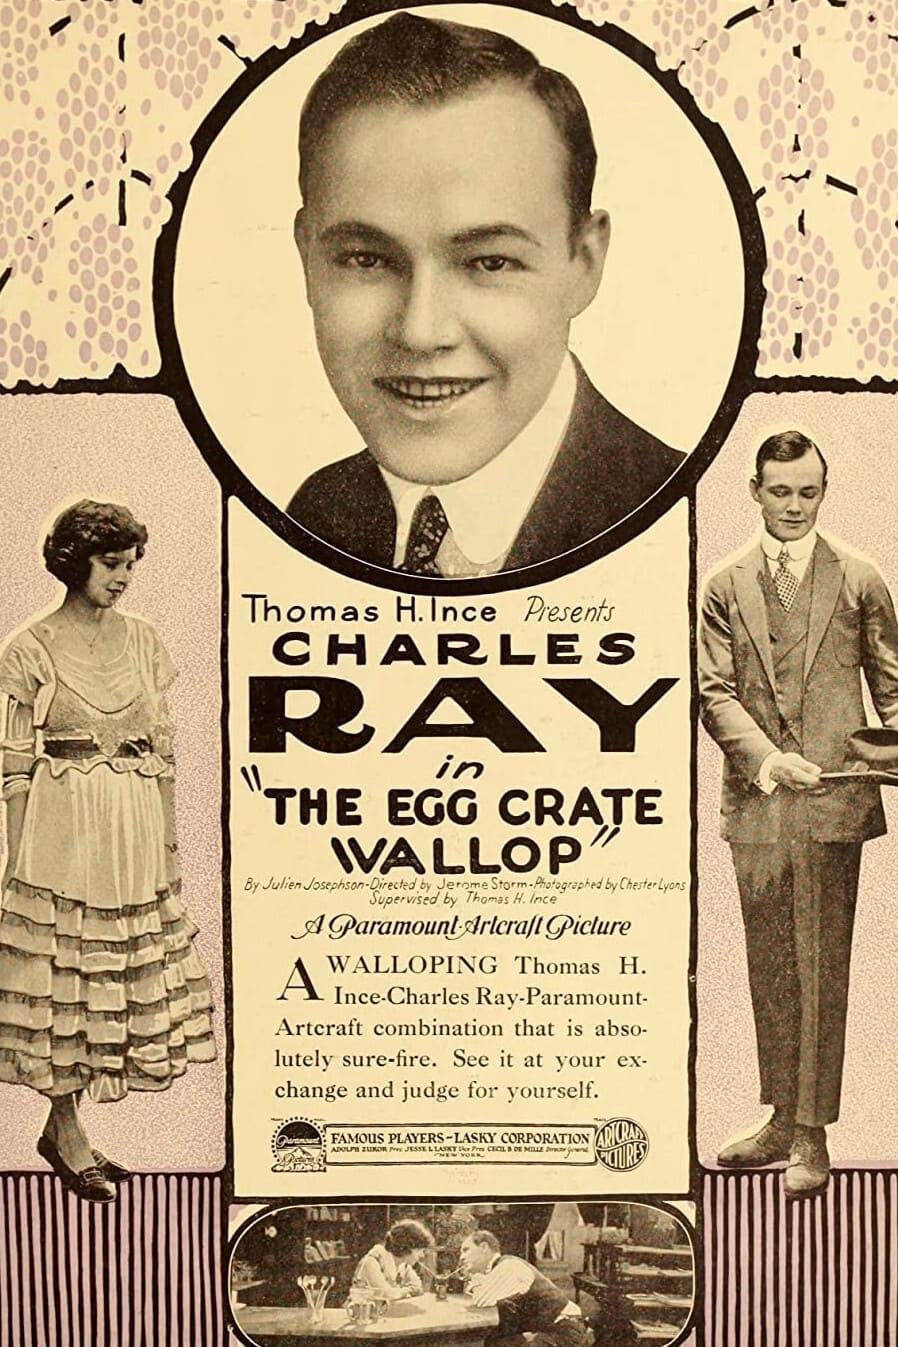 The Egg Crate Wallop poster